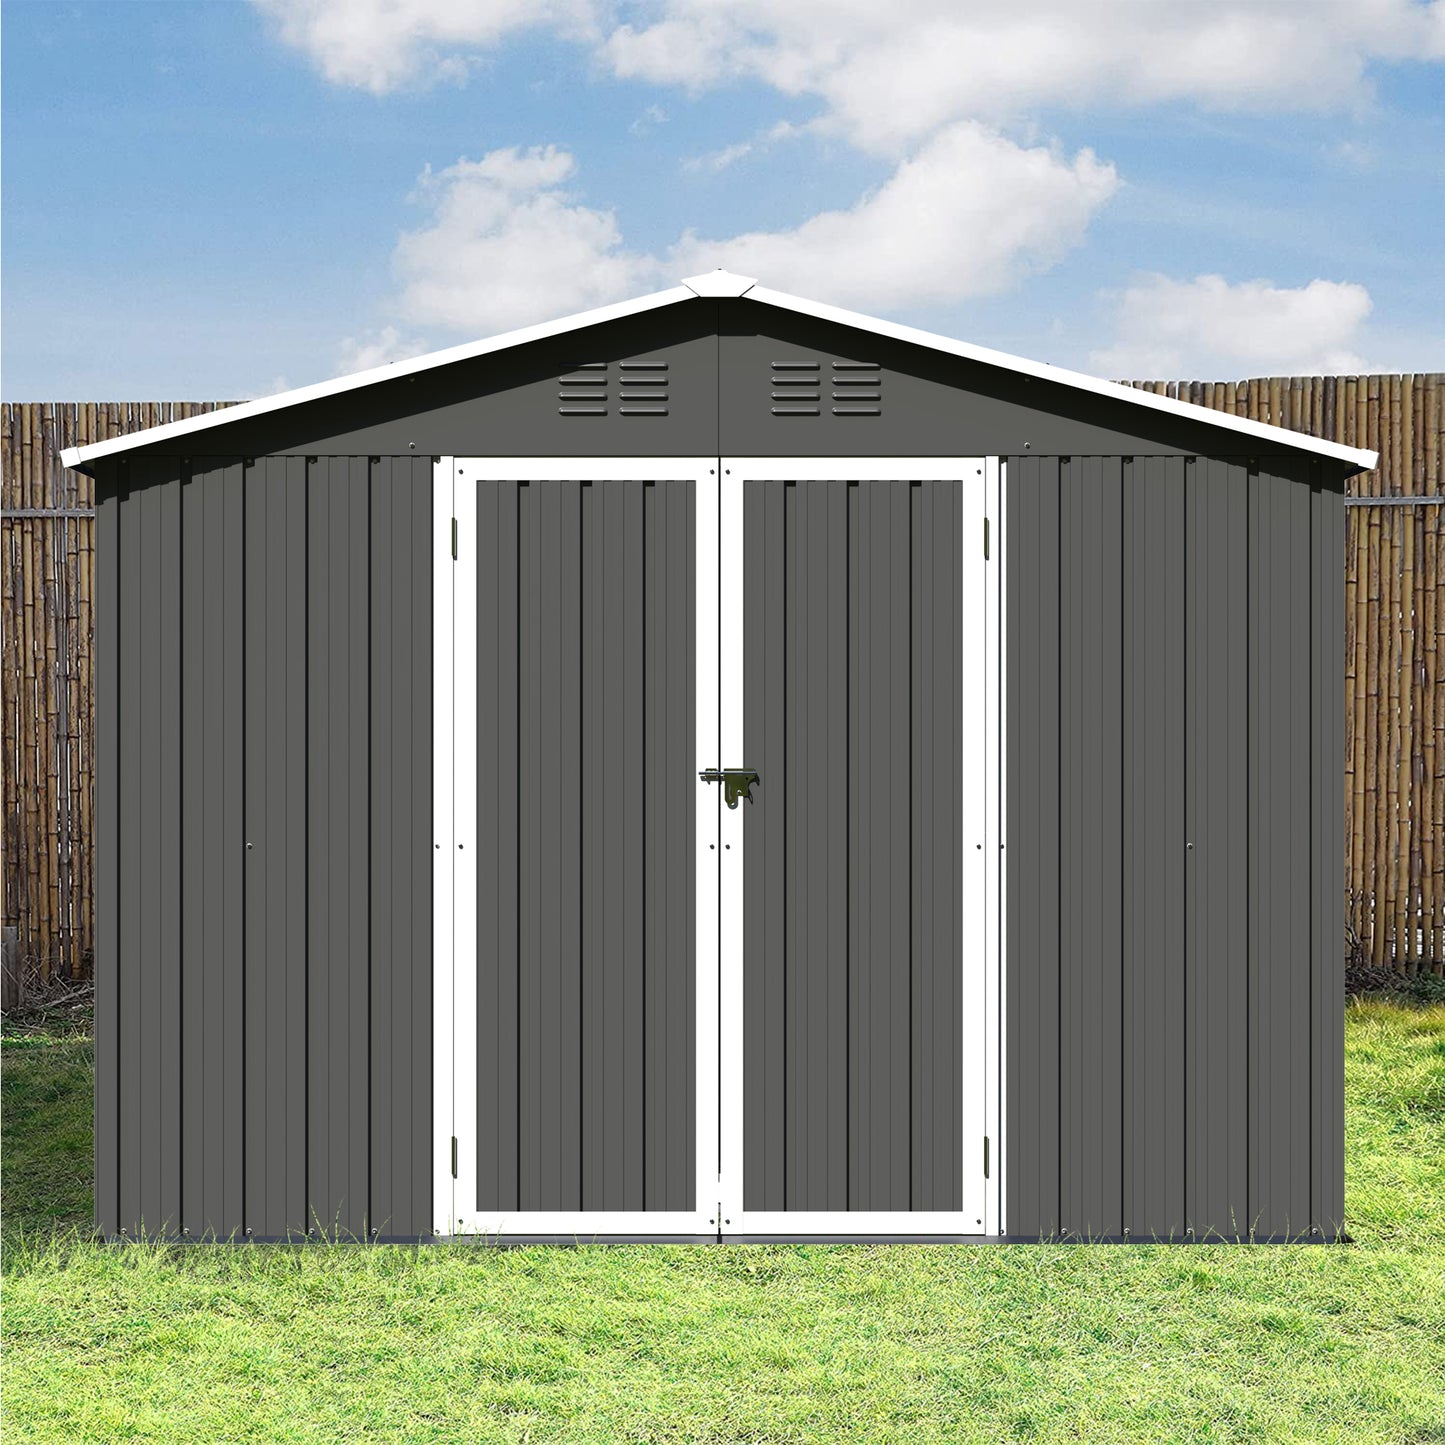 6' x 4' Outdoor Metal Storage Shed, Tools Storage Shed, Galvanized Steel Garden Shed with Lockable Doors, Outdoor Storage Shed for Backyard, Patio, Lawn, Y038